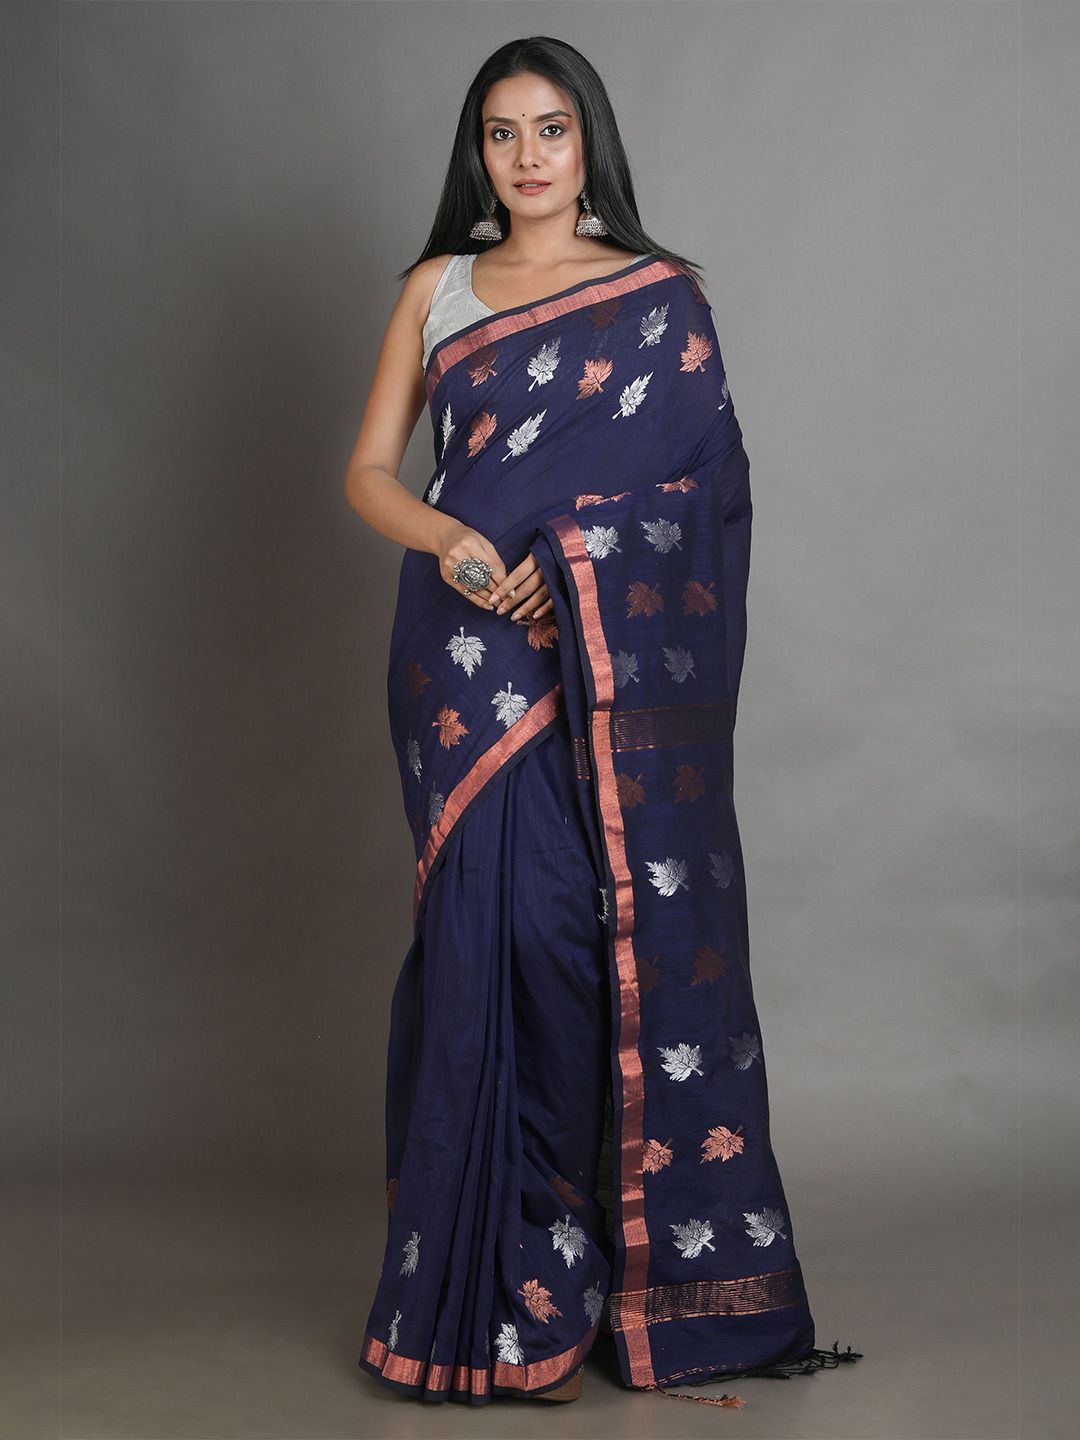 Arhi Navy Blue & Silver-Toned Floral Handwoven Pure Linen Saree Price in India